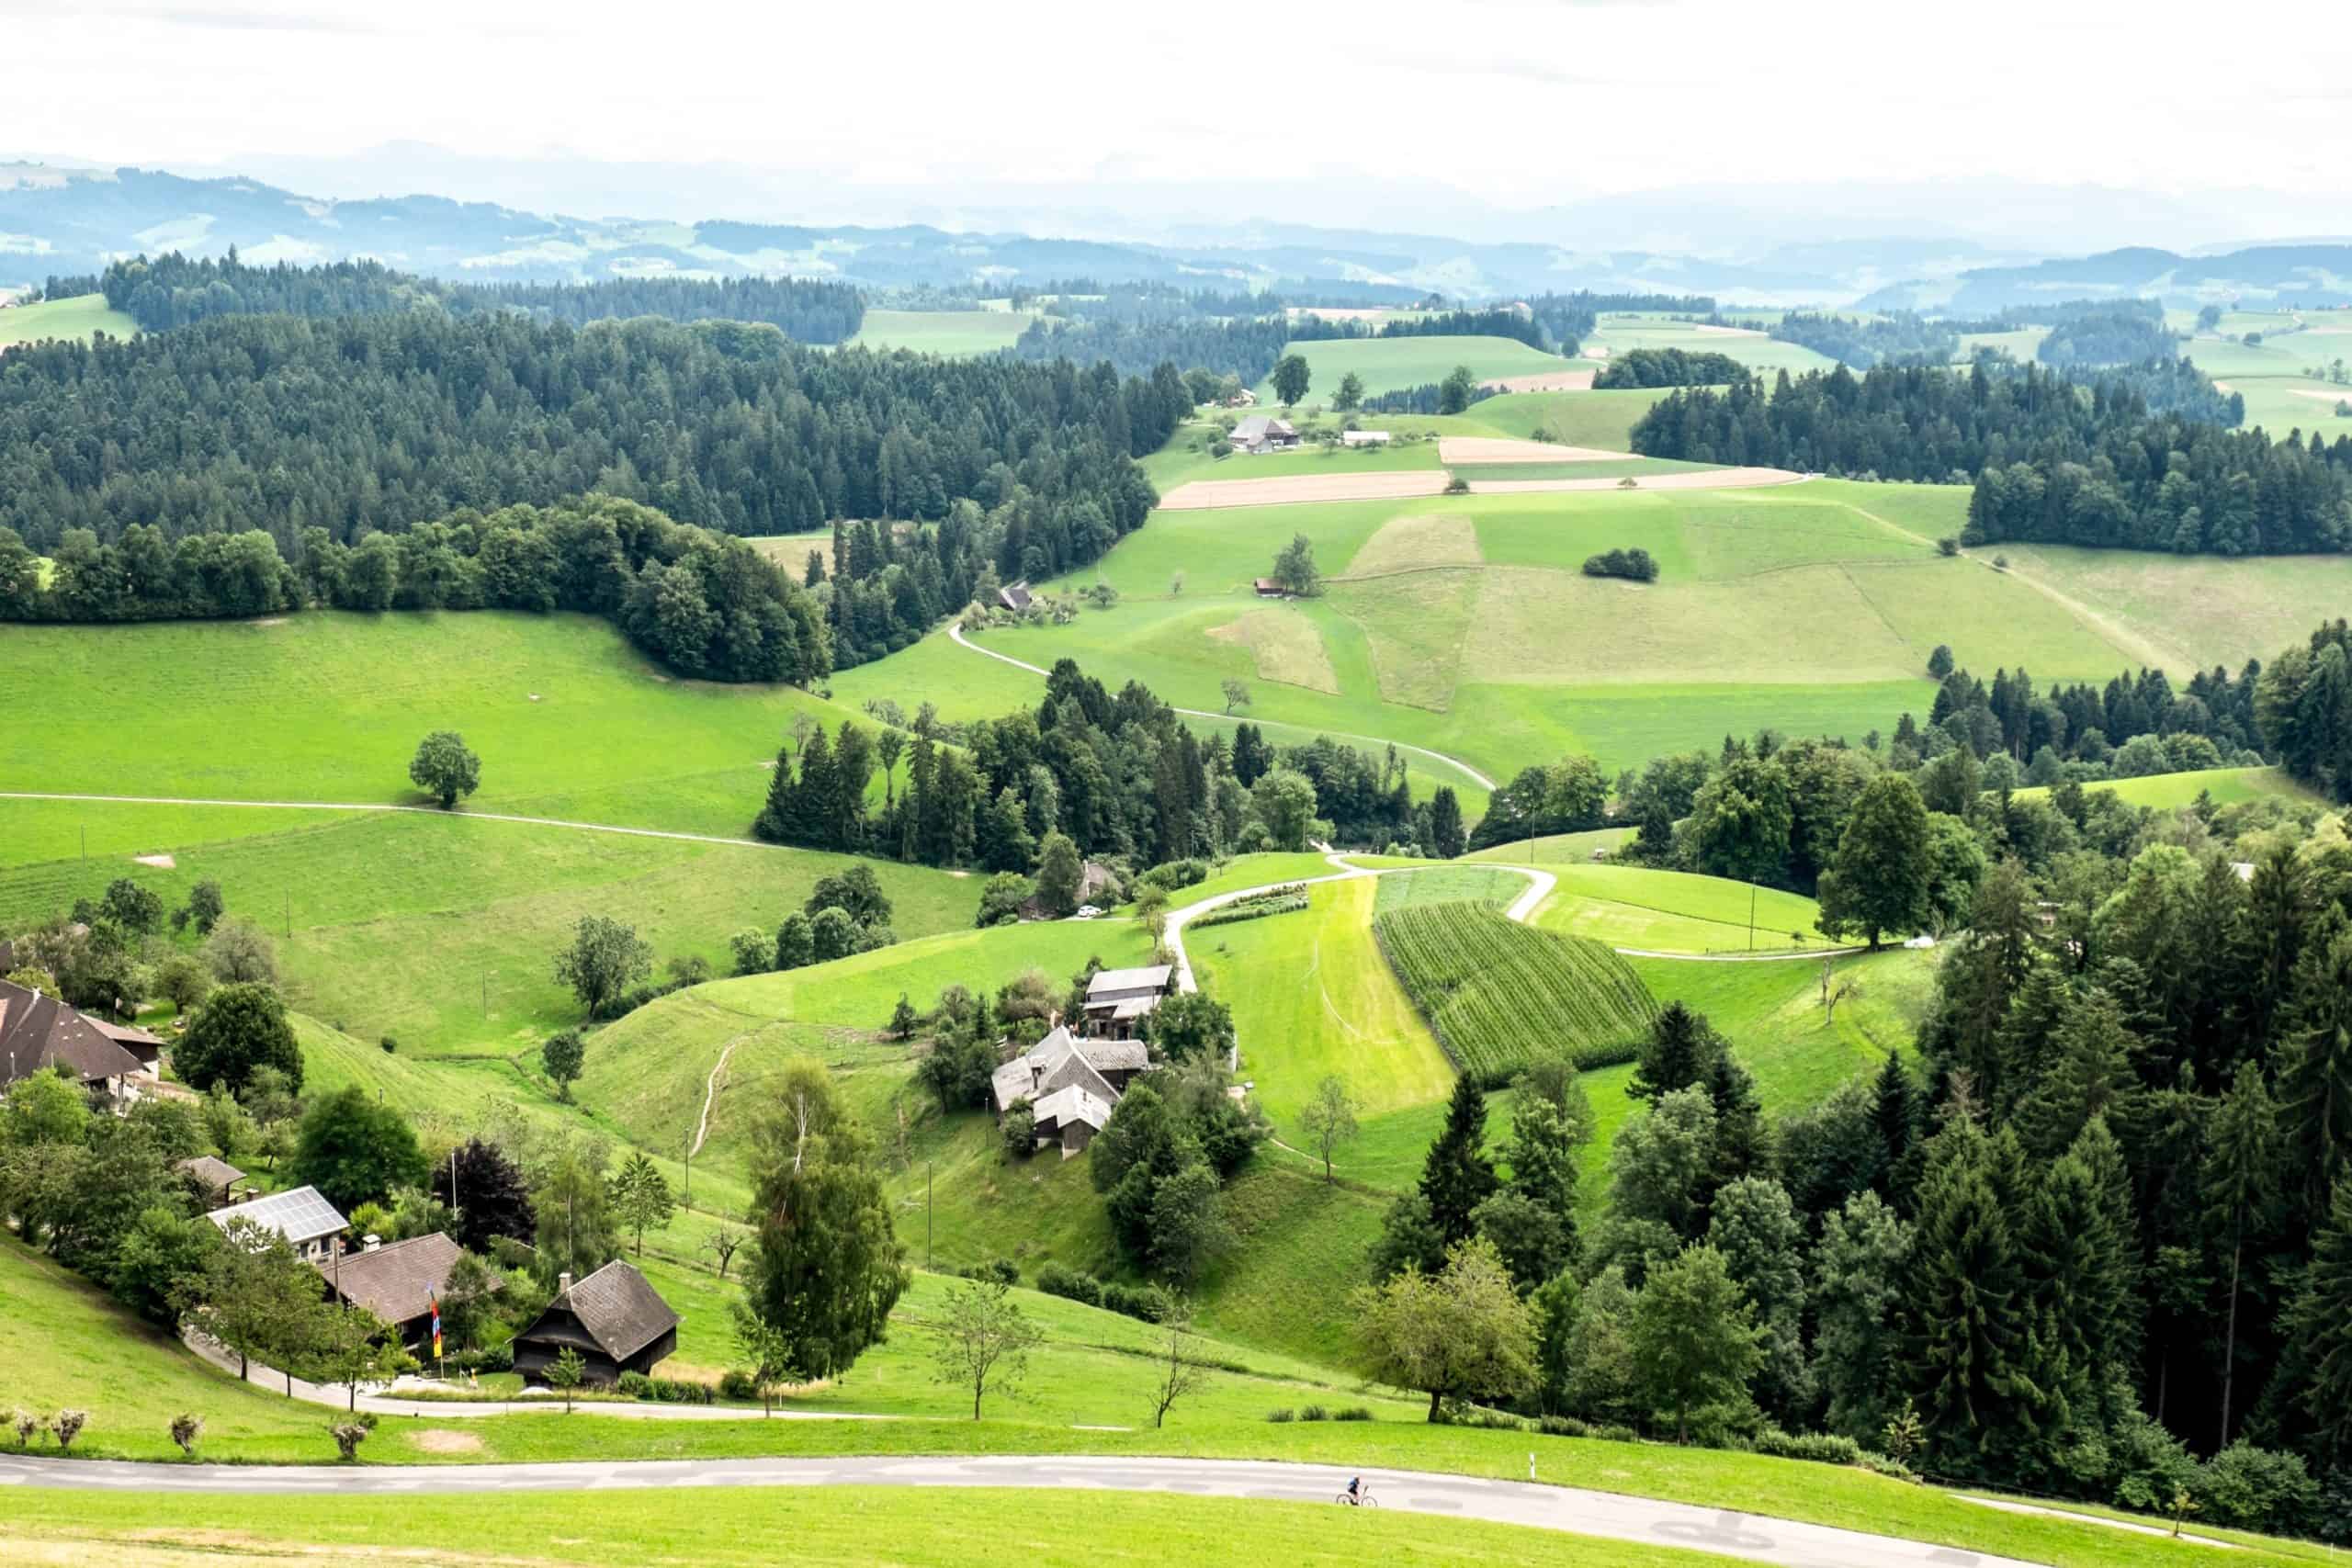 Views of the rolling green hills of the Emmental Valley in Switzerland